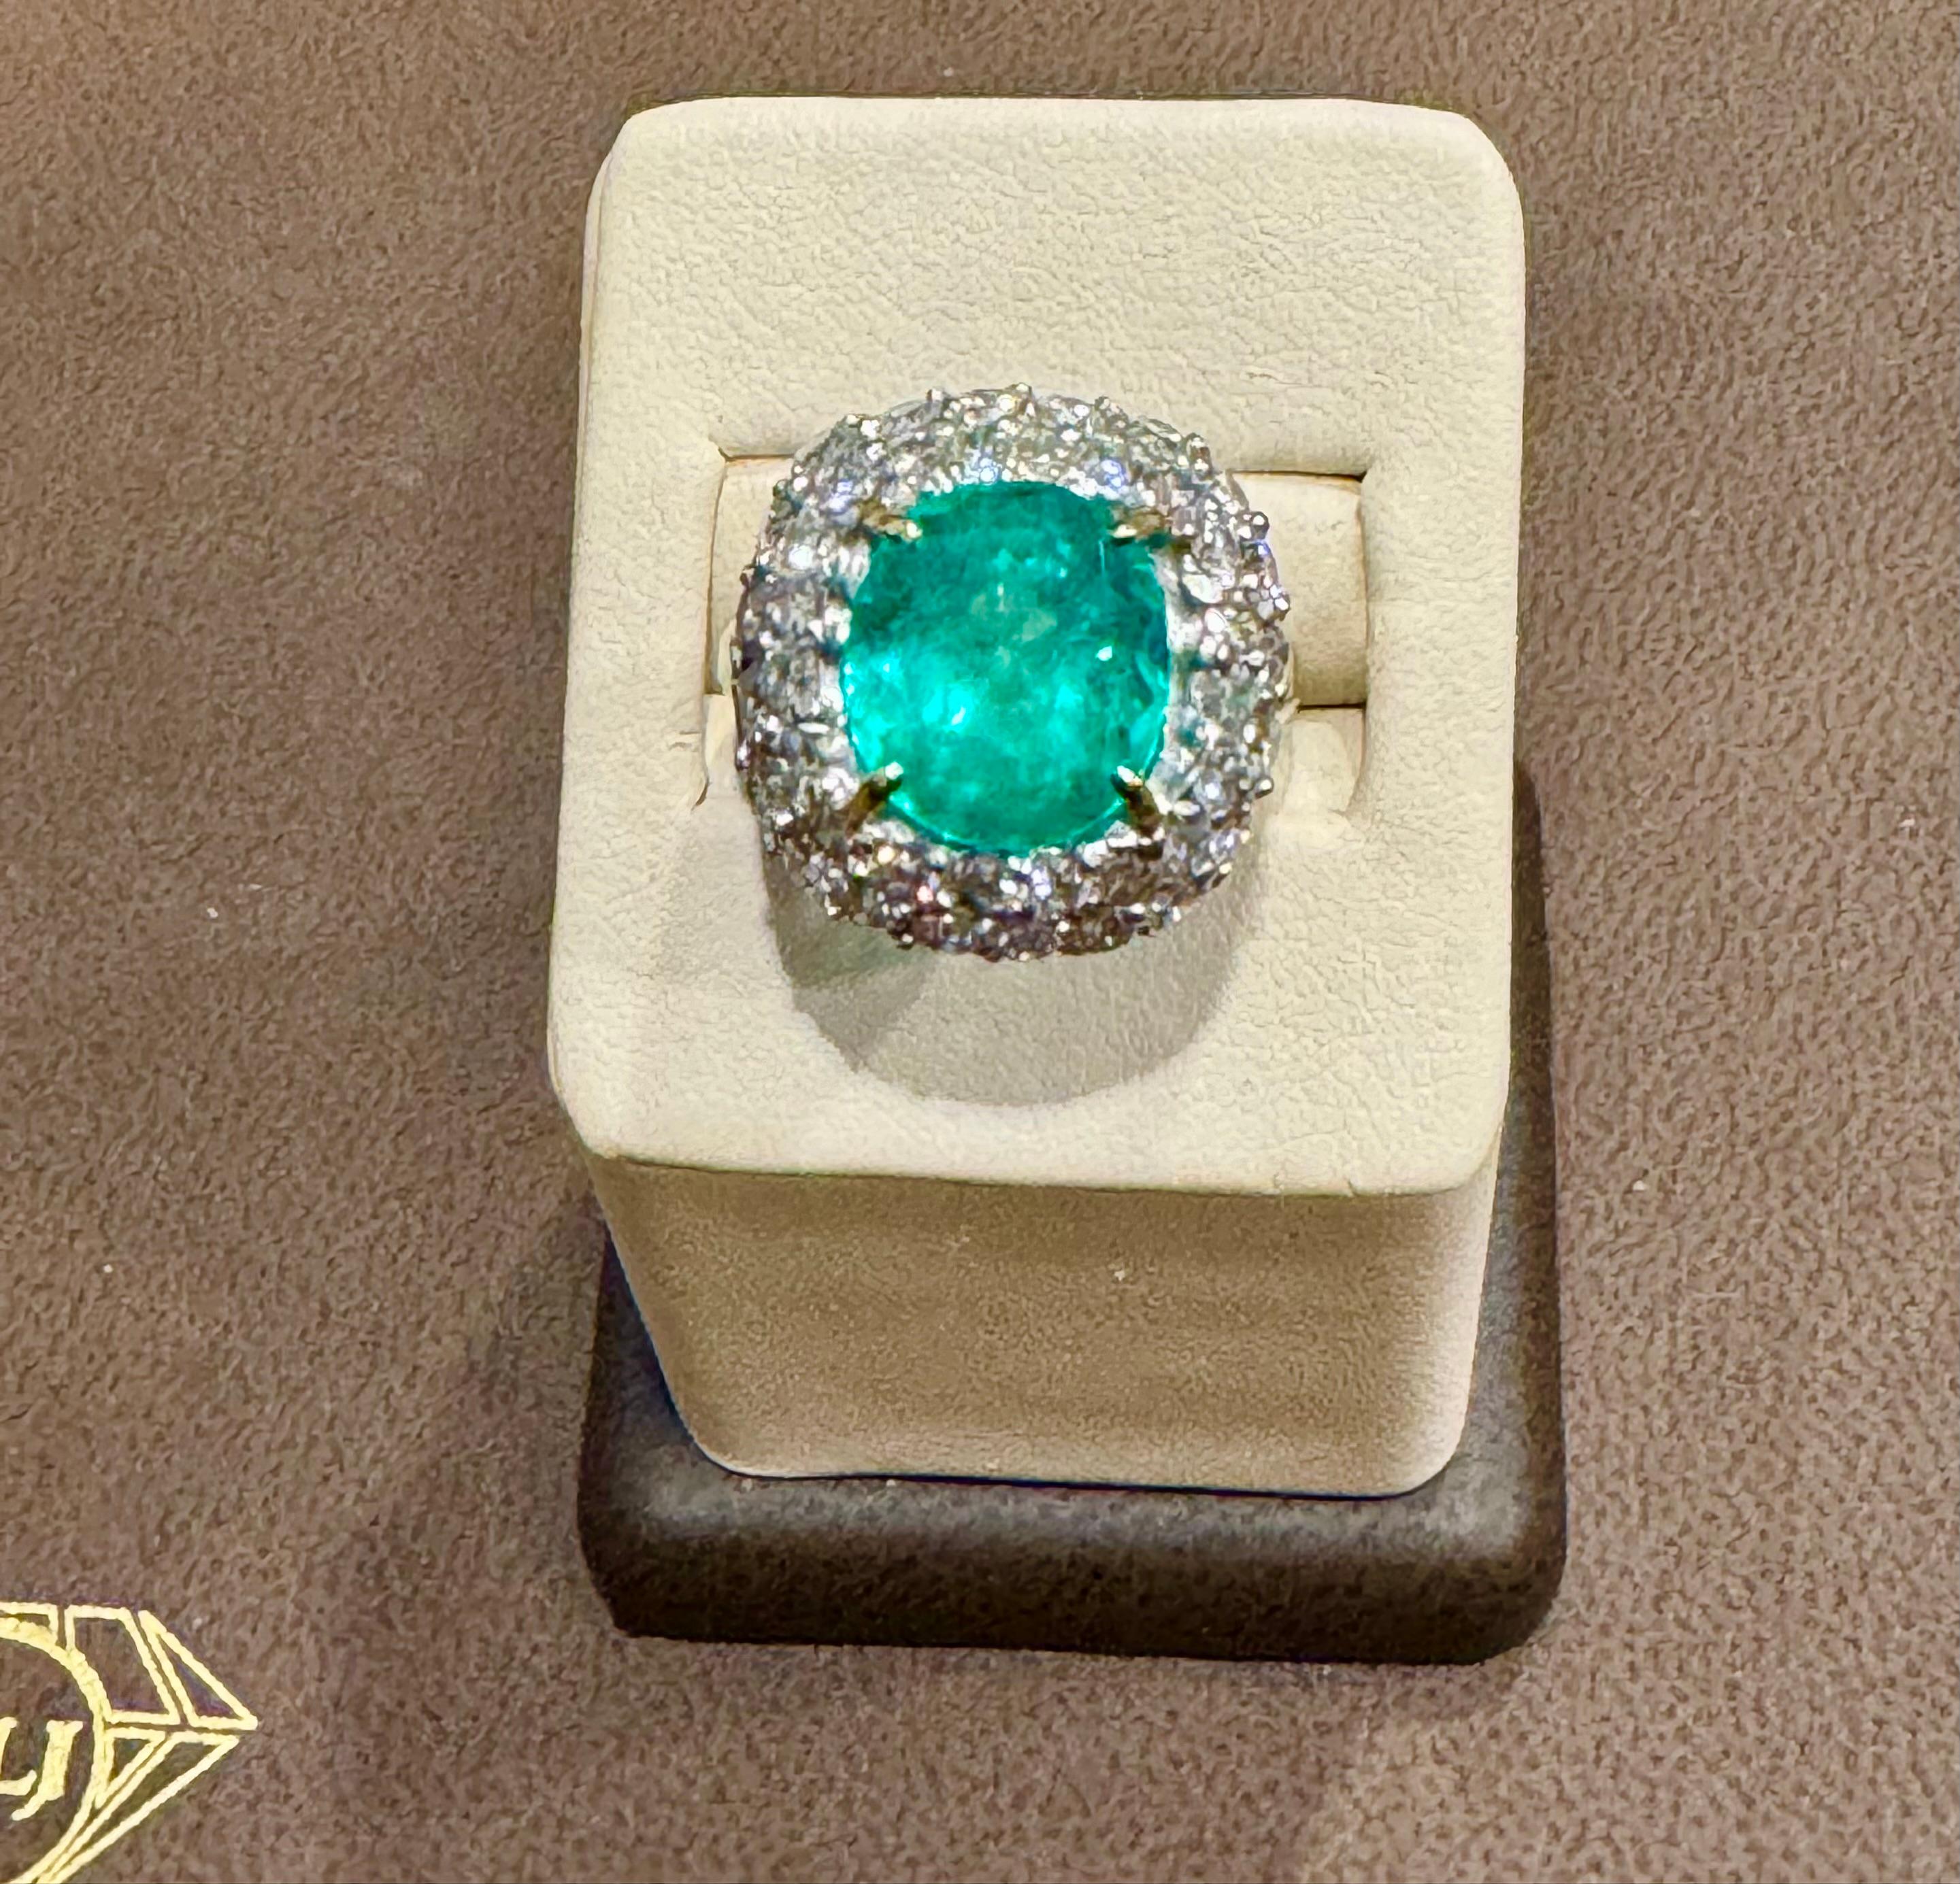 7 Carat Cushion Cut Colombian Emerald & 3.5 Ct Diamond Ring in Platinum Size 6.2 For Sale 2